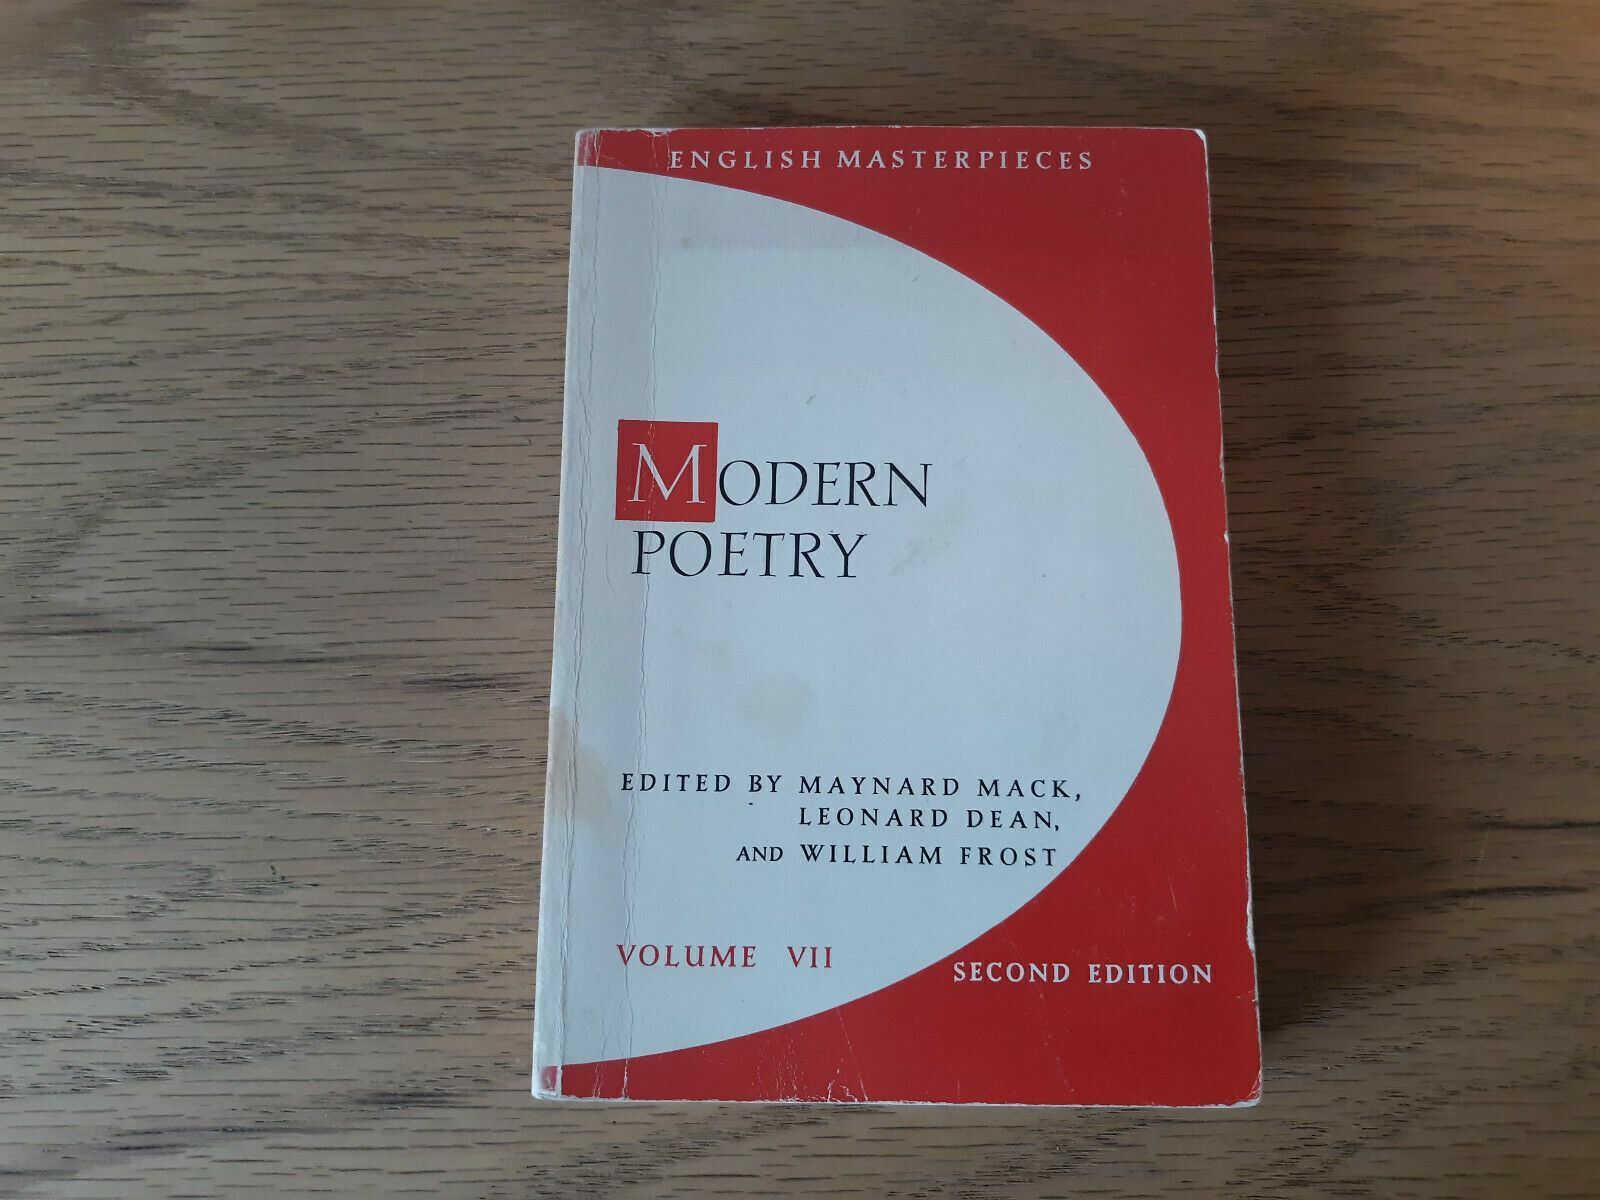 Modern Poetry [English Masterpieces] Volume VII, 2nd Edition Paperback 1961